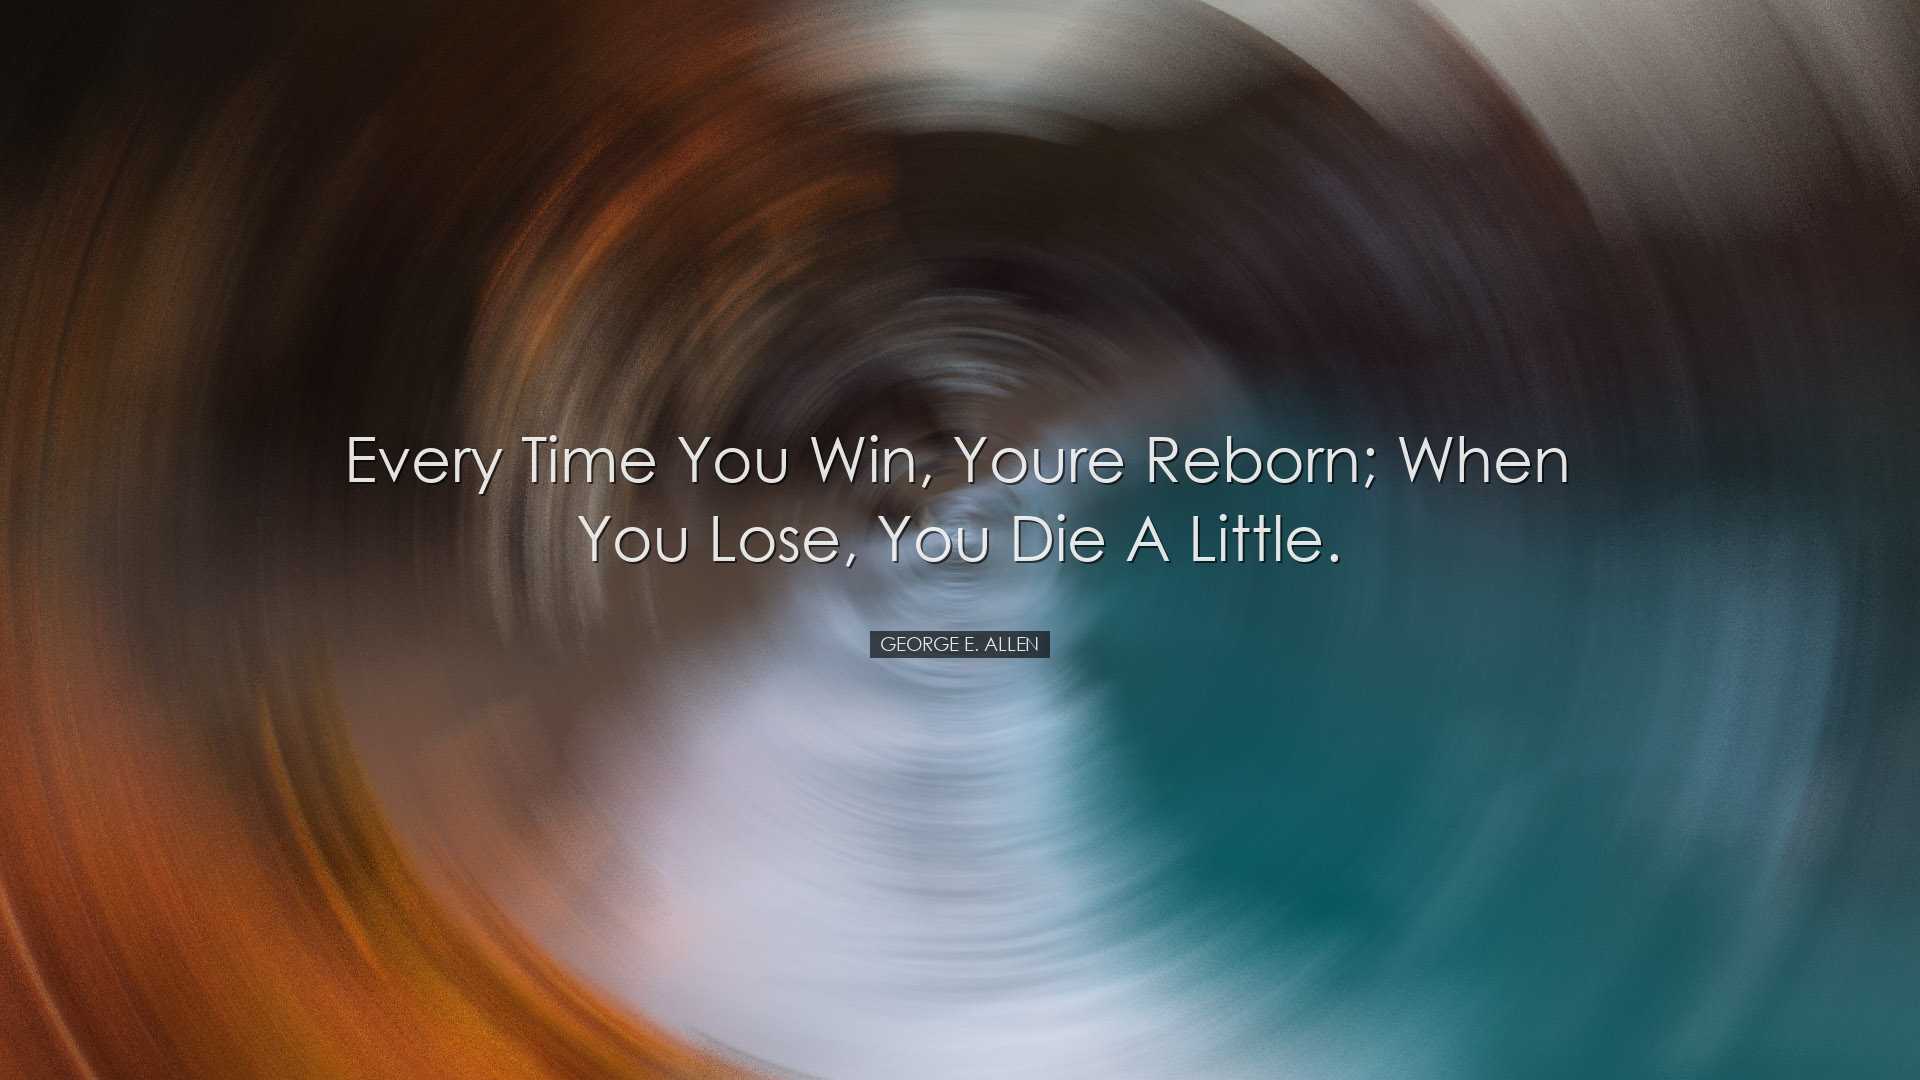 Every time you win, youre reborn; when you lose, you die a little.